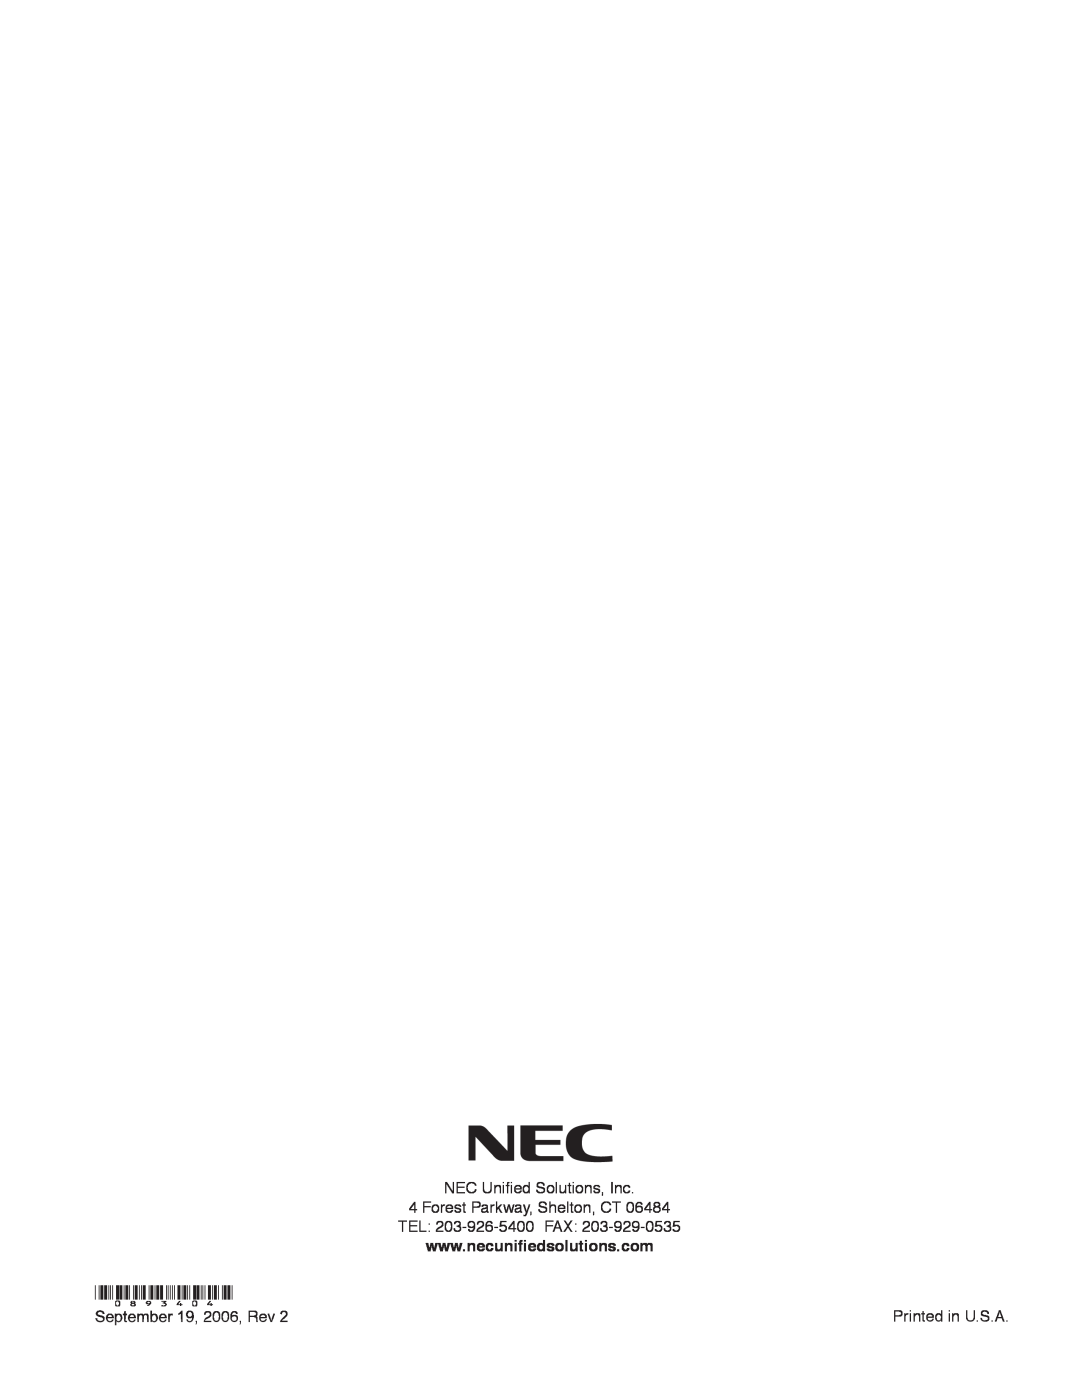 NEC 4-Button IP Keyset manual NEC Uniﬁed Solutions, Inc 4 Forest Parkway, Shelton, CT, 0893404, September 19, 2006, Rev 